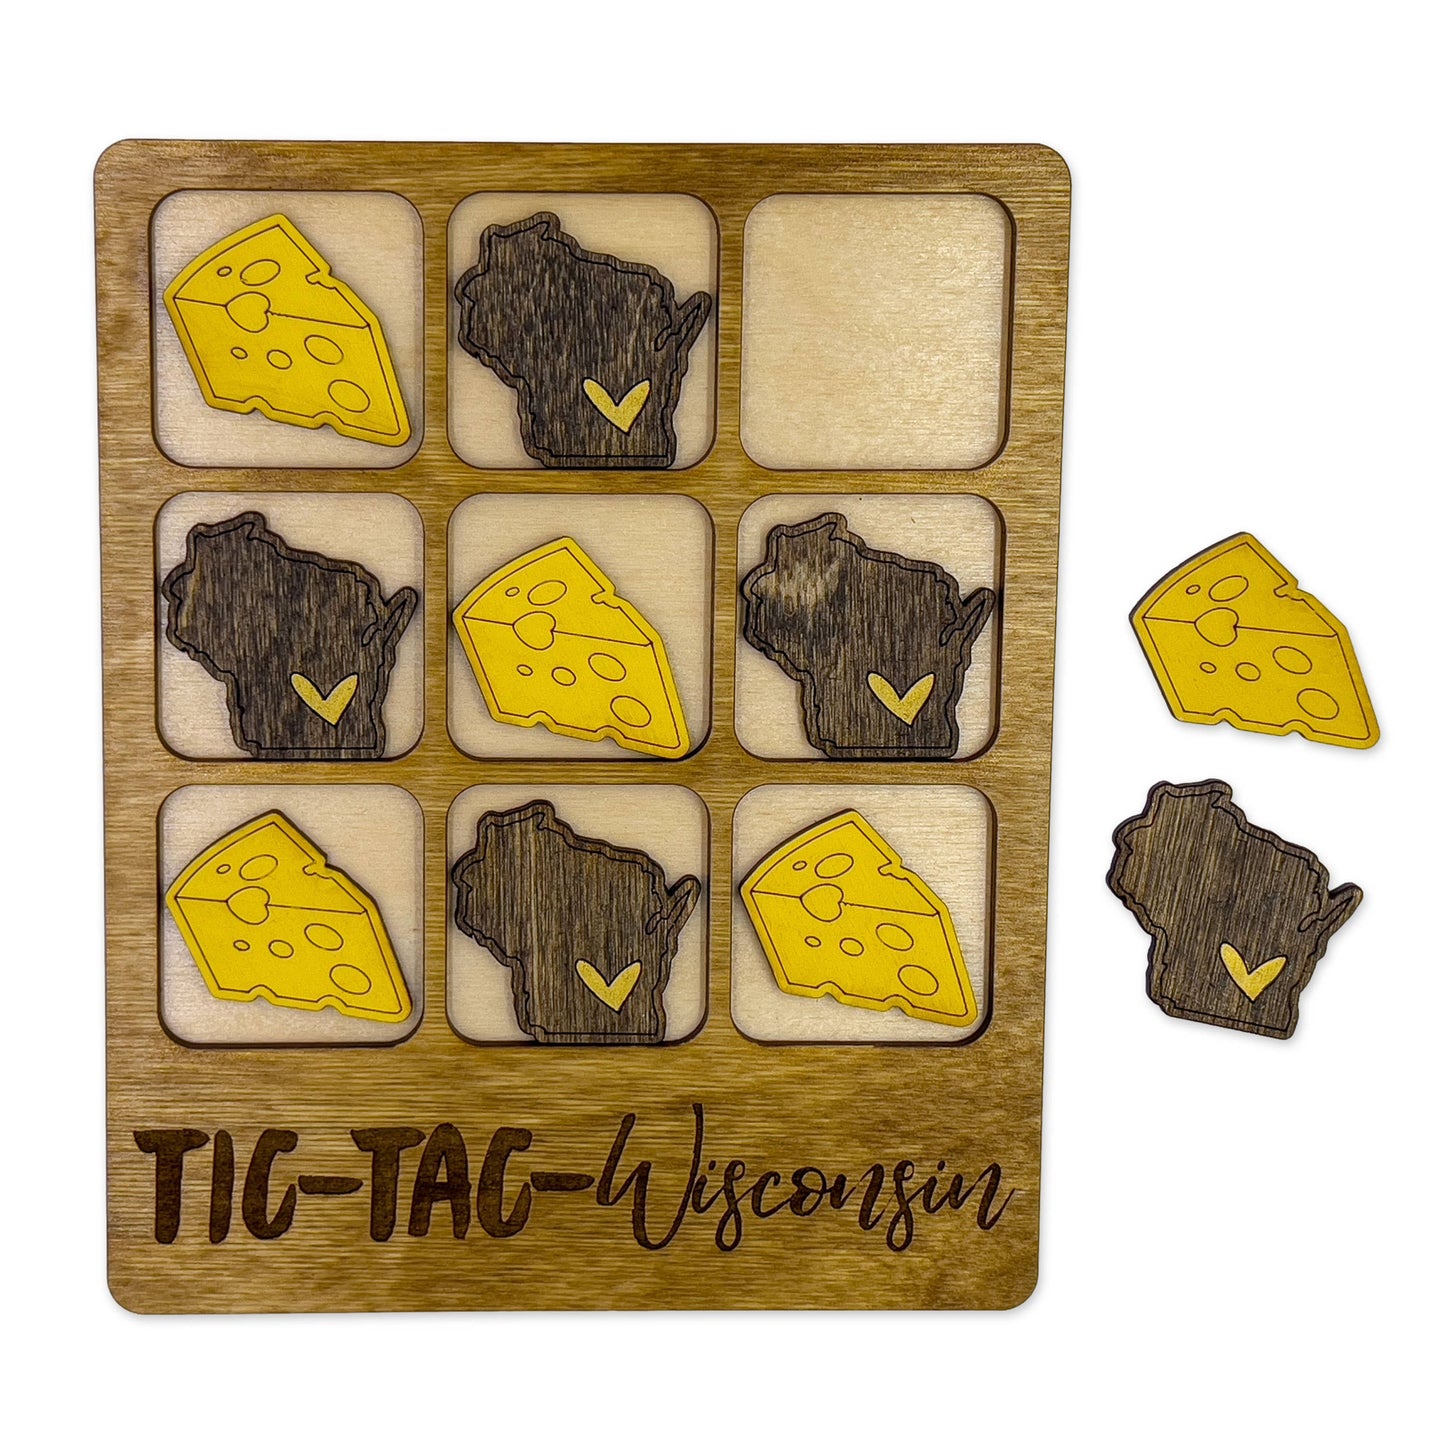 The Chirping Squirrel - Wisconsin State Gift - Tic-Tac-Toe